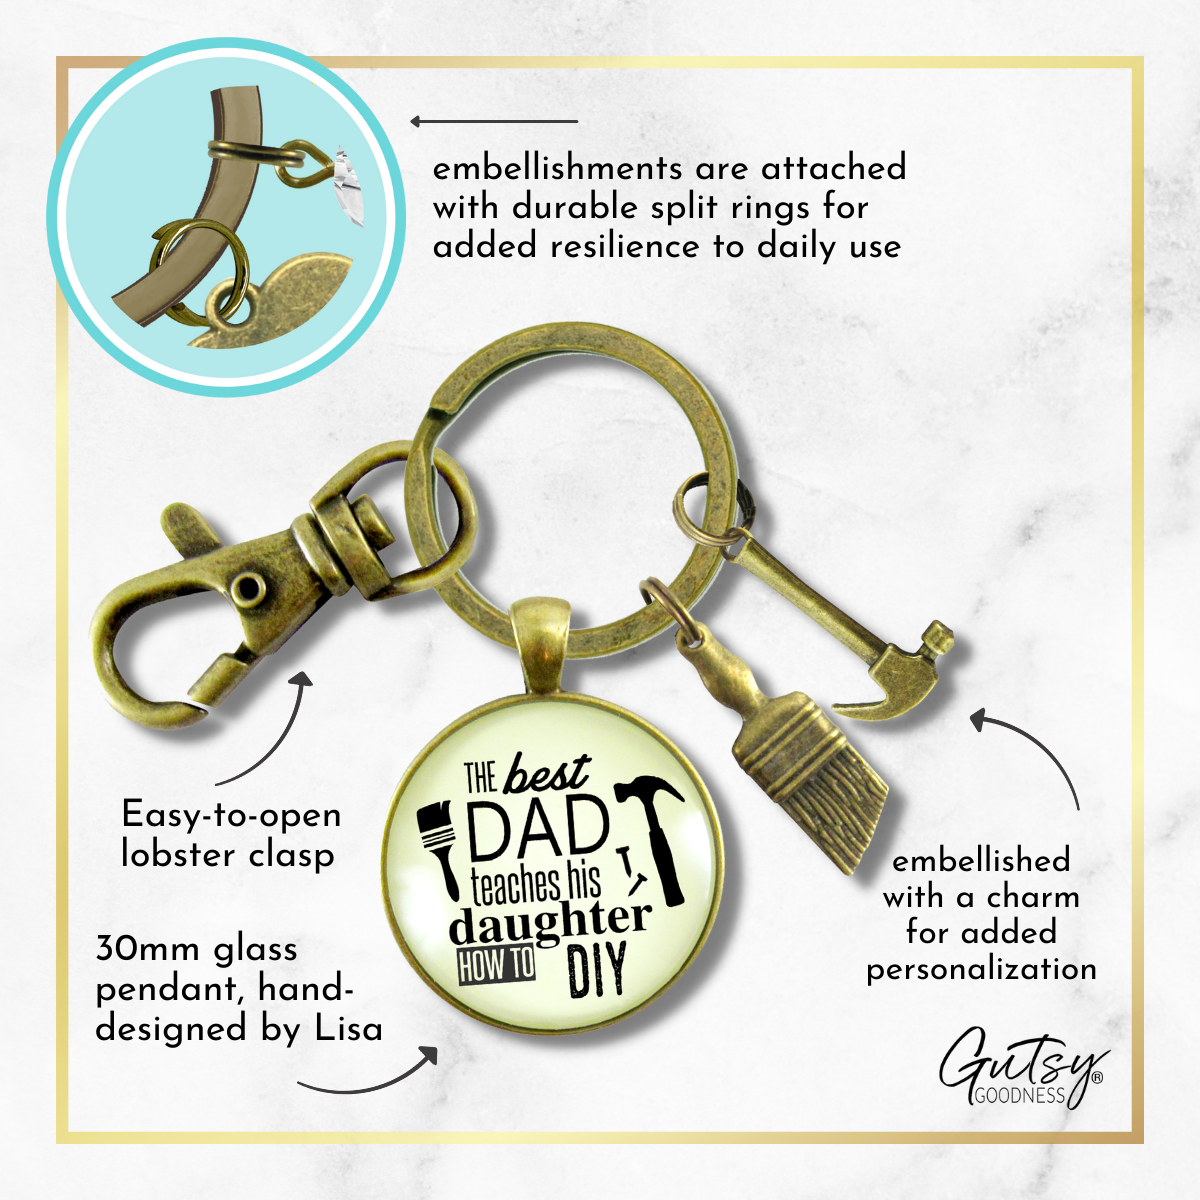 Best Dad Teaches His Daughter How To DIY Keychain Fixer Upper Mens Key Ring Tool Hammer Charm - Gutsy Goodness Handmade Jewelry;Best Dad Teaches His Daughter How To Diy Keychain Fixer Upper Mens Key Ring Tool Hammer Charm - Gutsy Goodness Handmade Jewelry Gifts